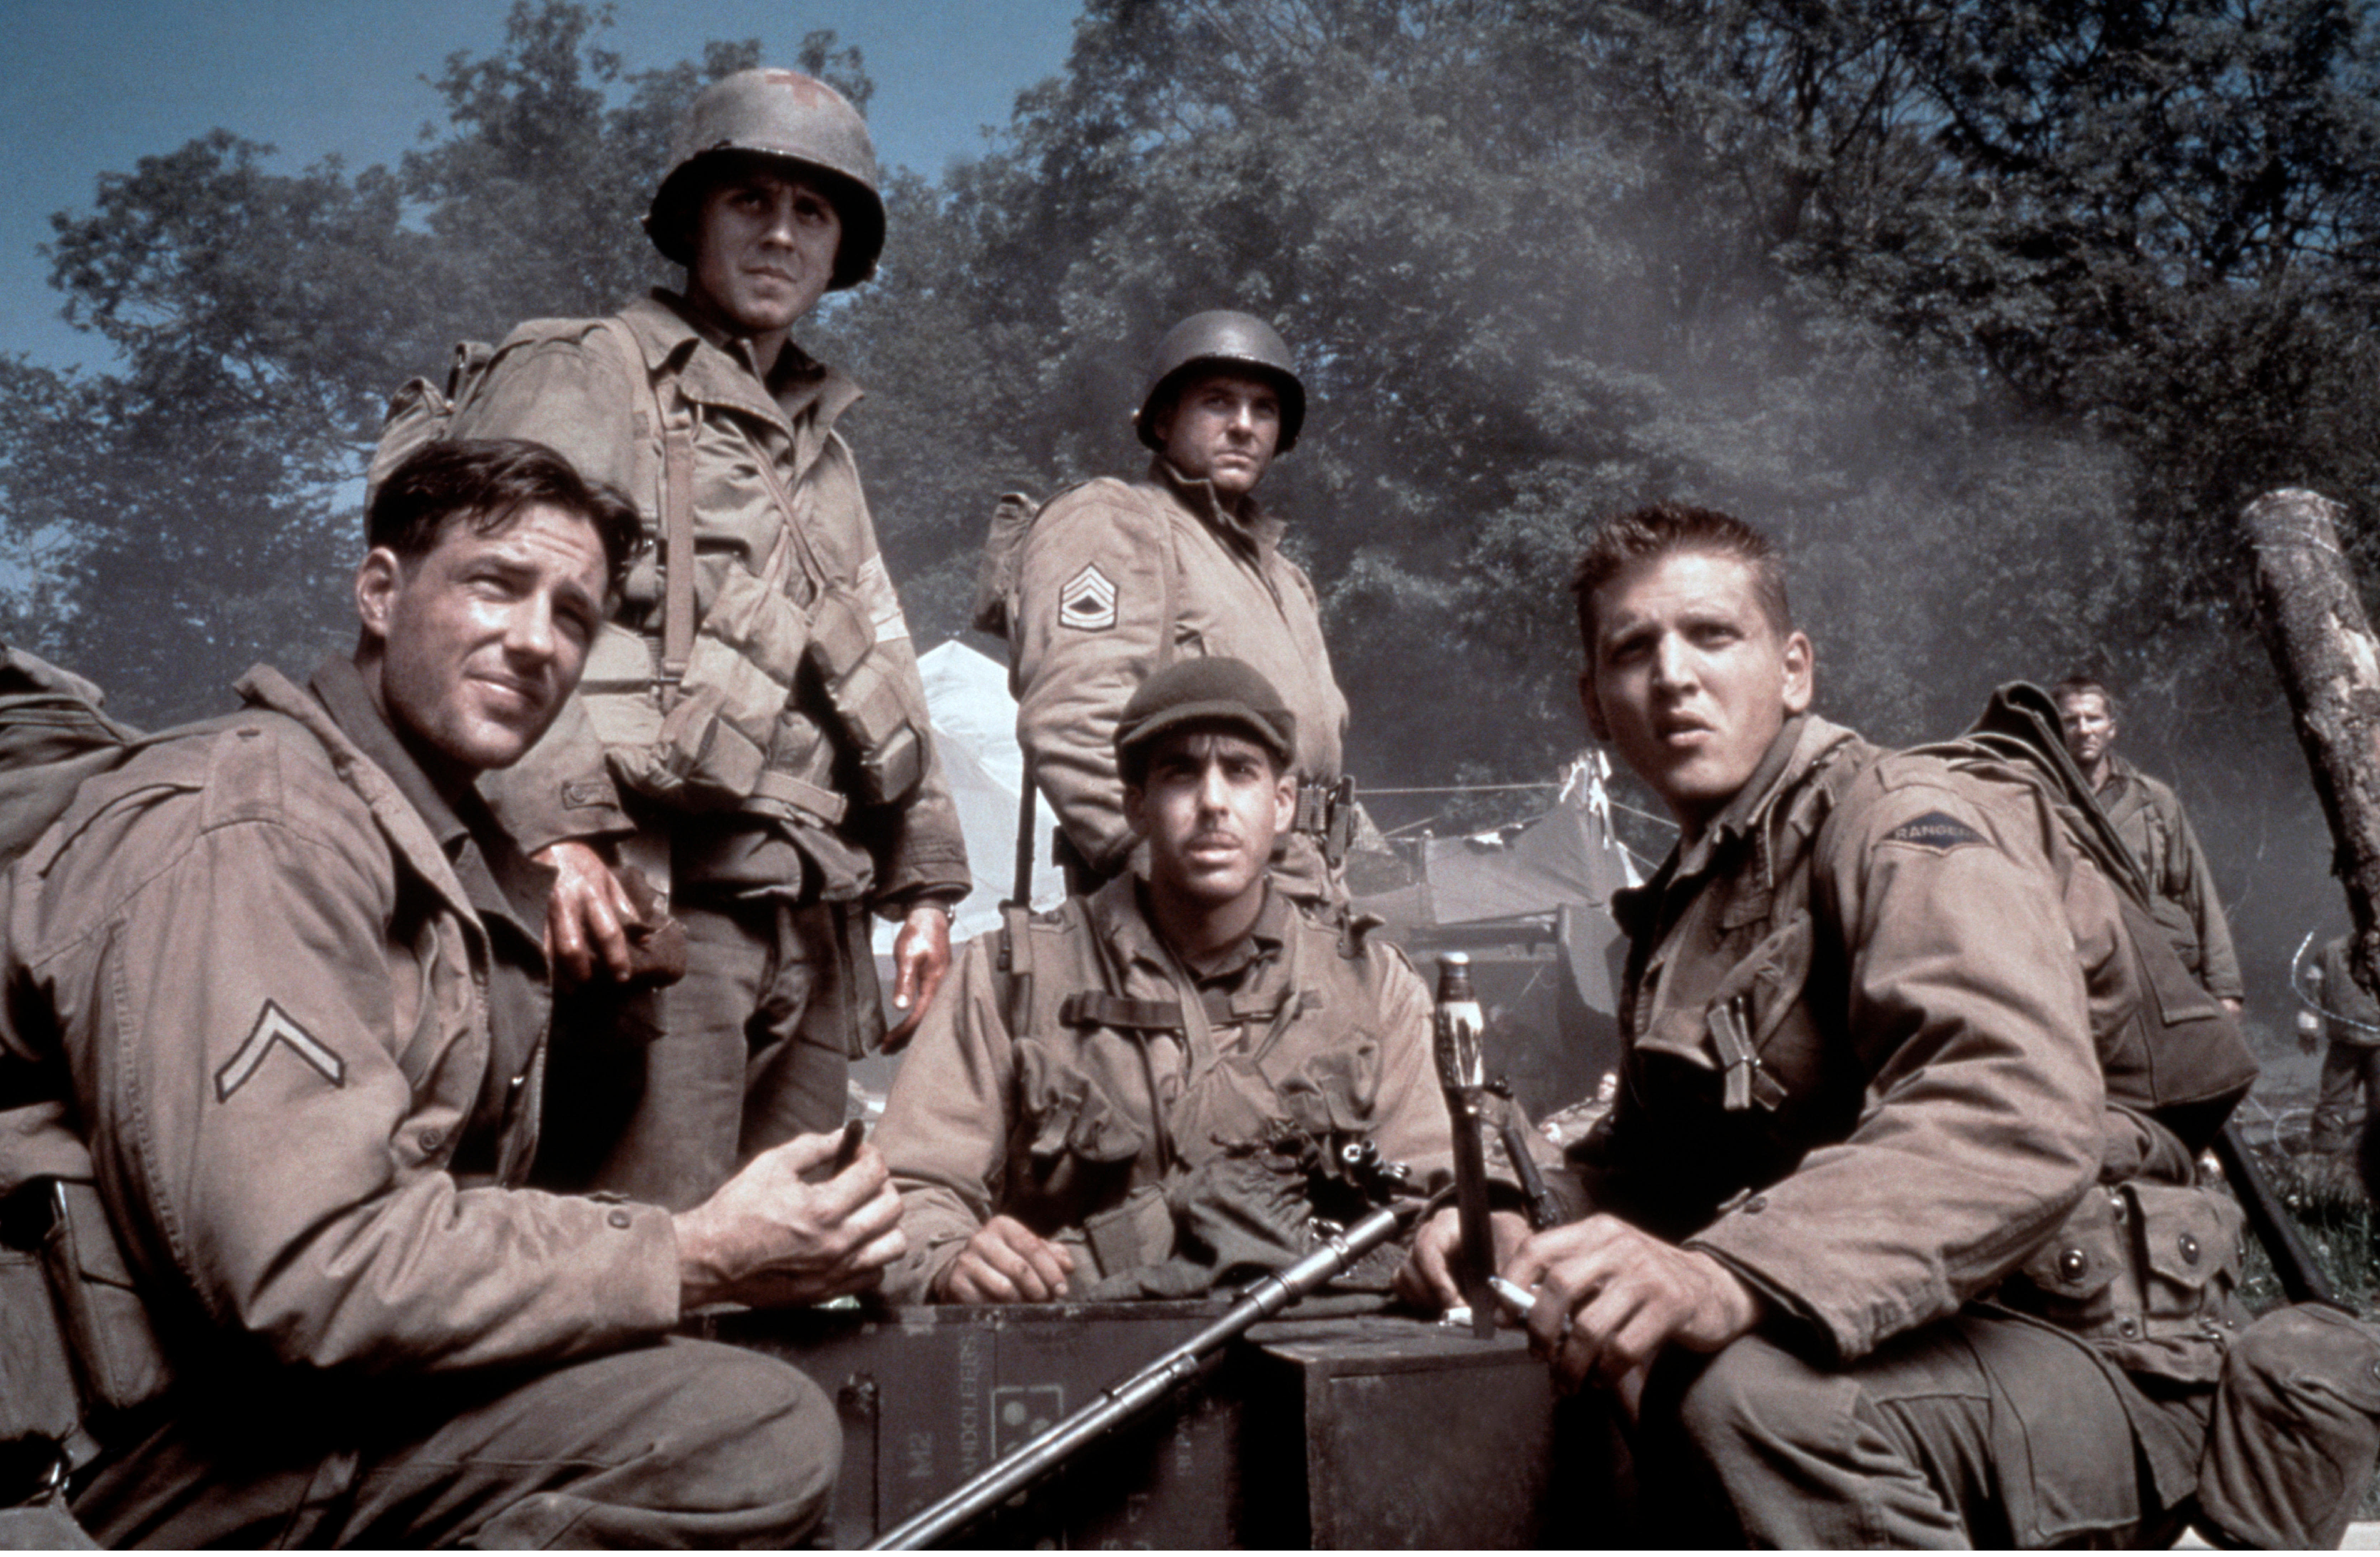 Saving Private Ryan cast almost quit before filming began: 'Worst experience of my life'